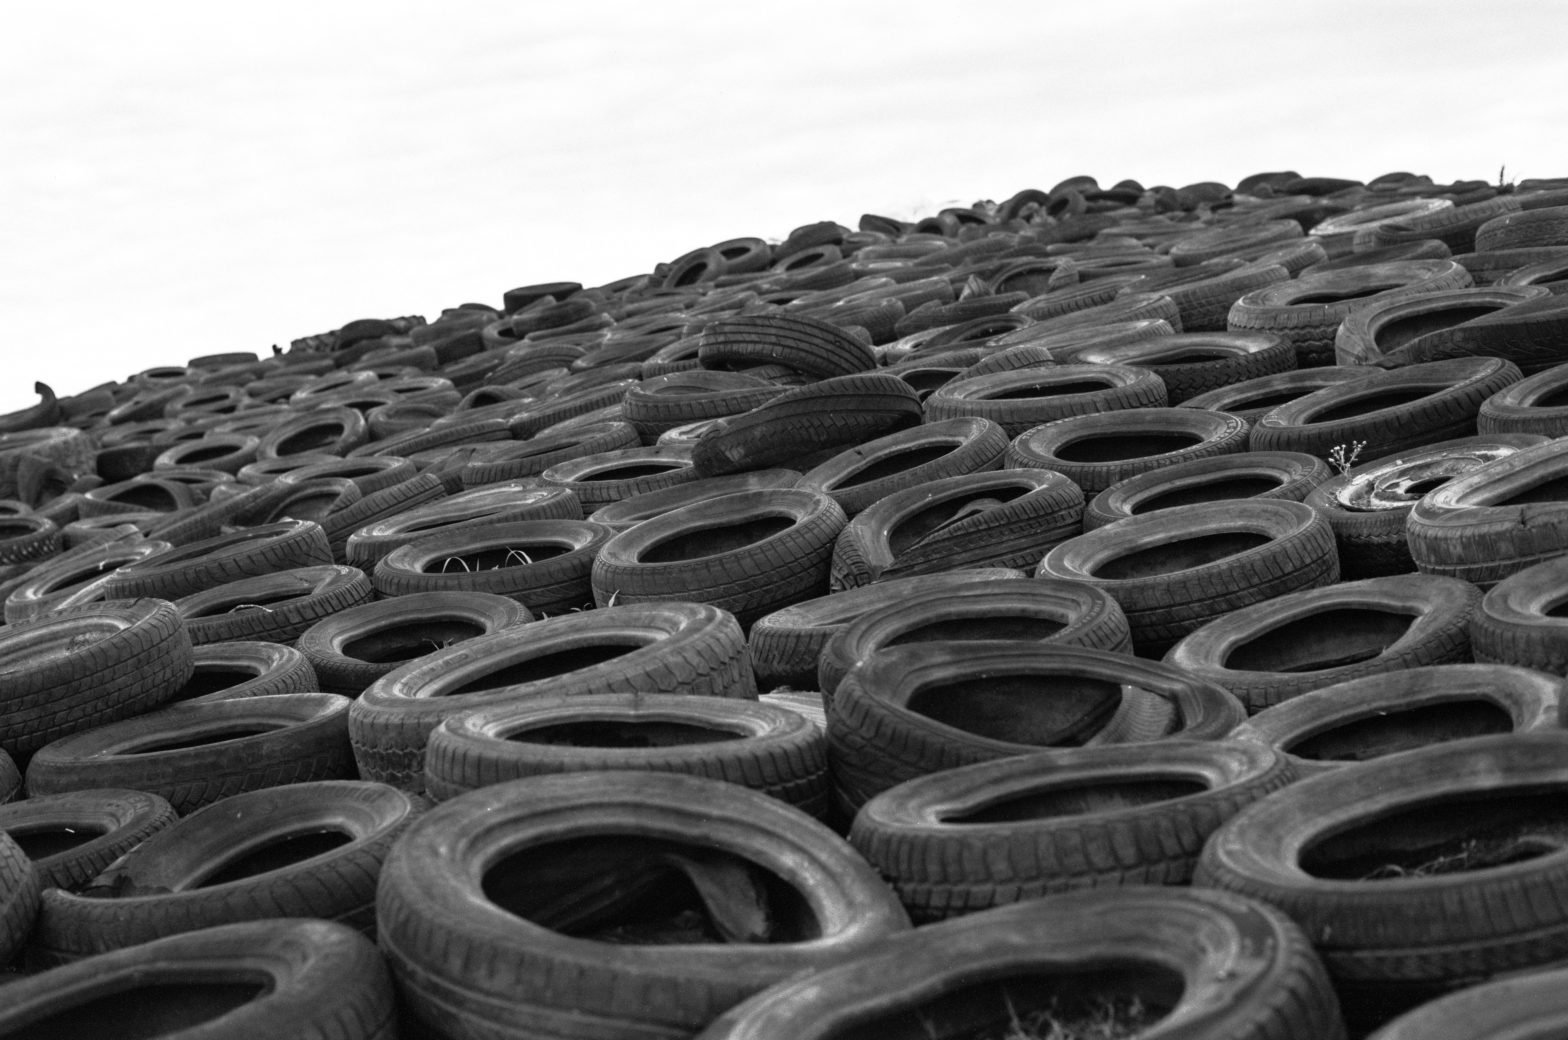 How to Dispose of Used Tires in BC